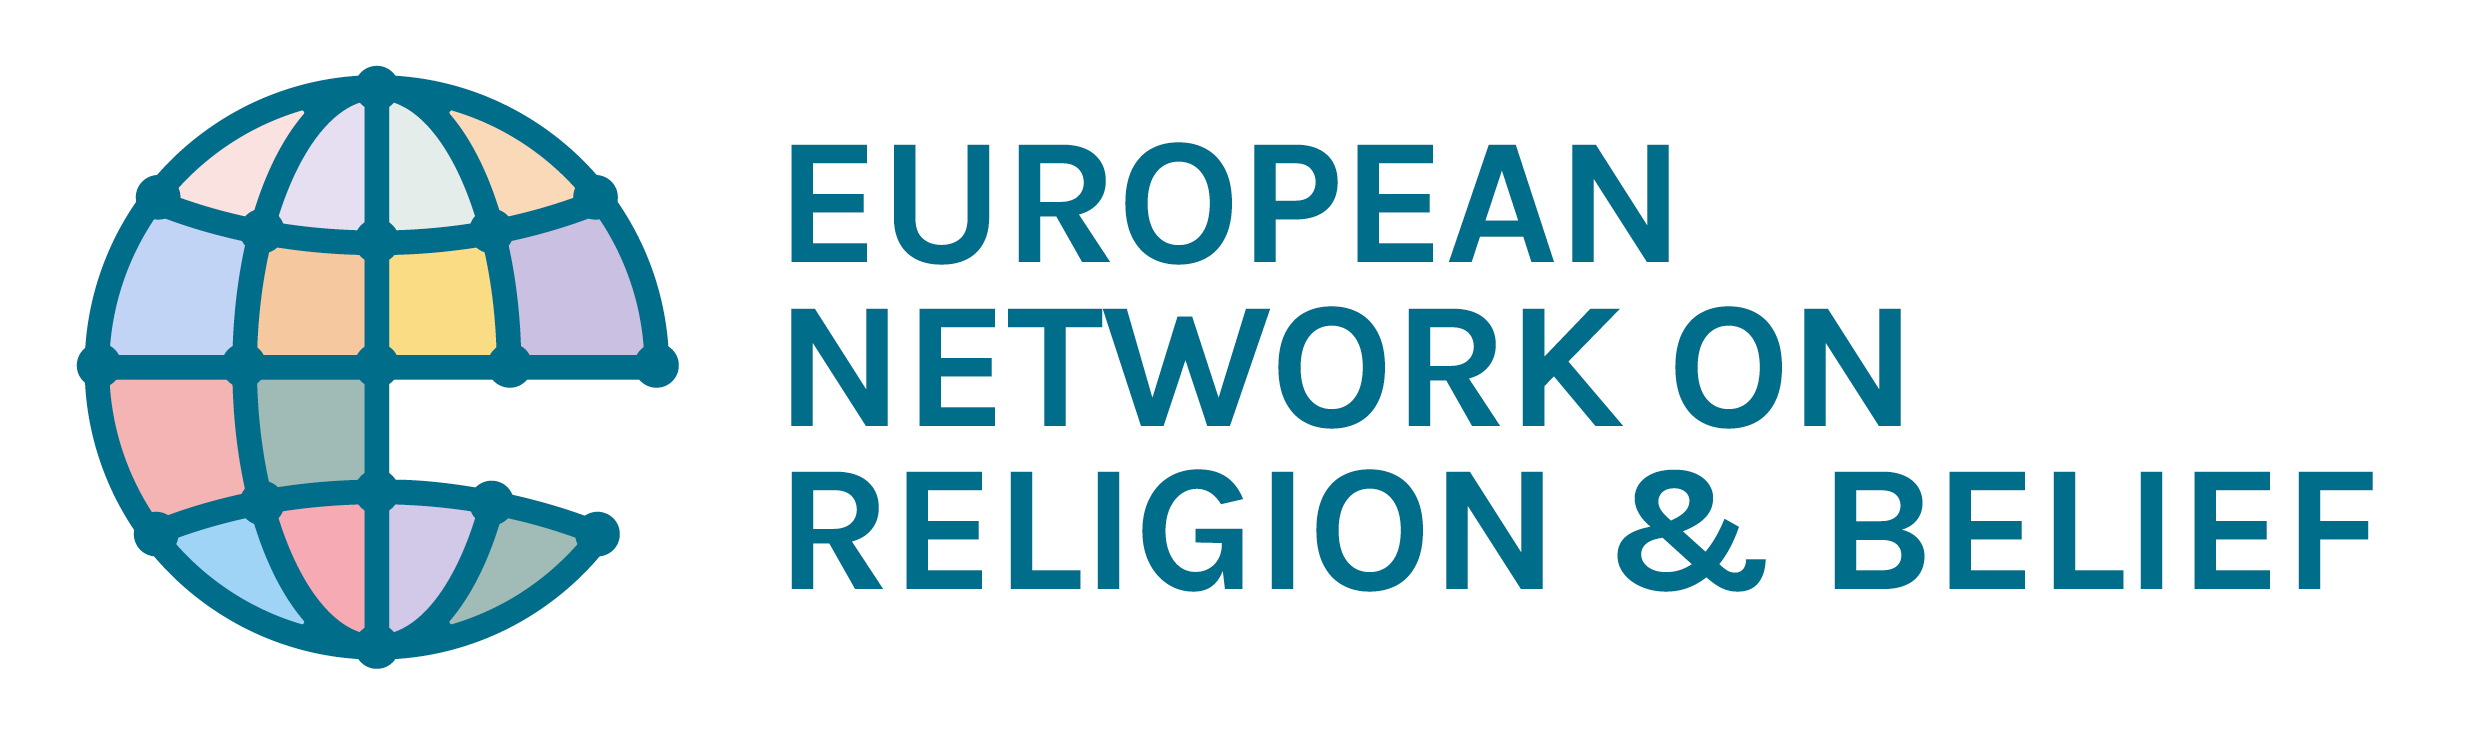 European Network on Religion and Belief (ENORB) logo